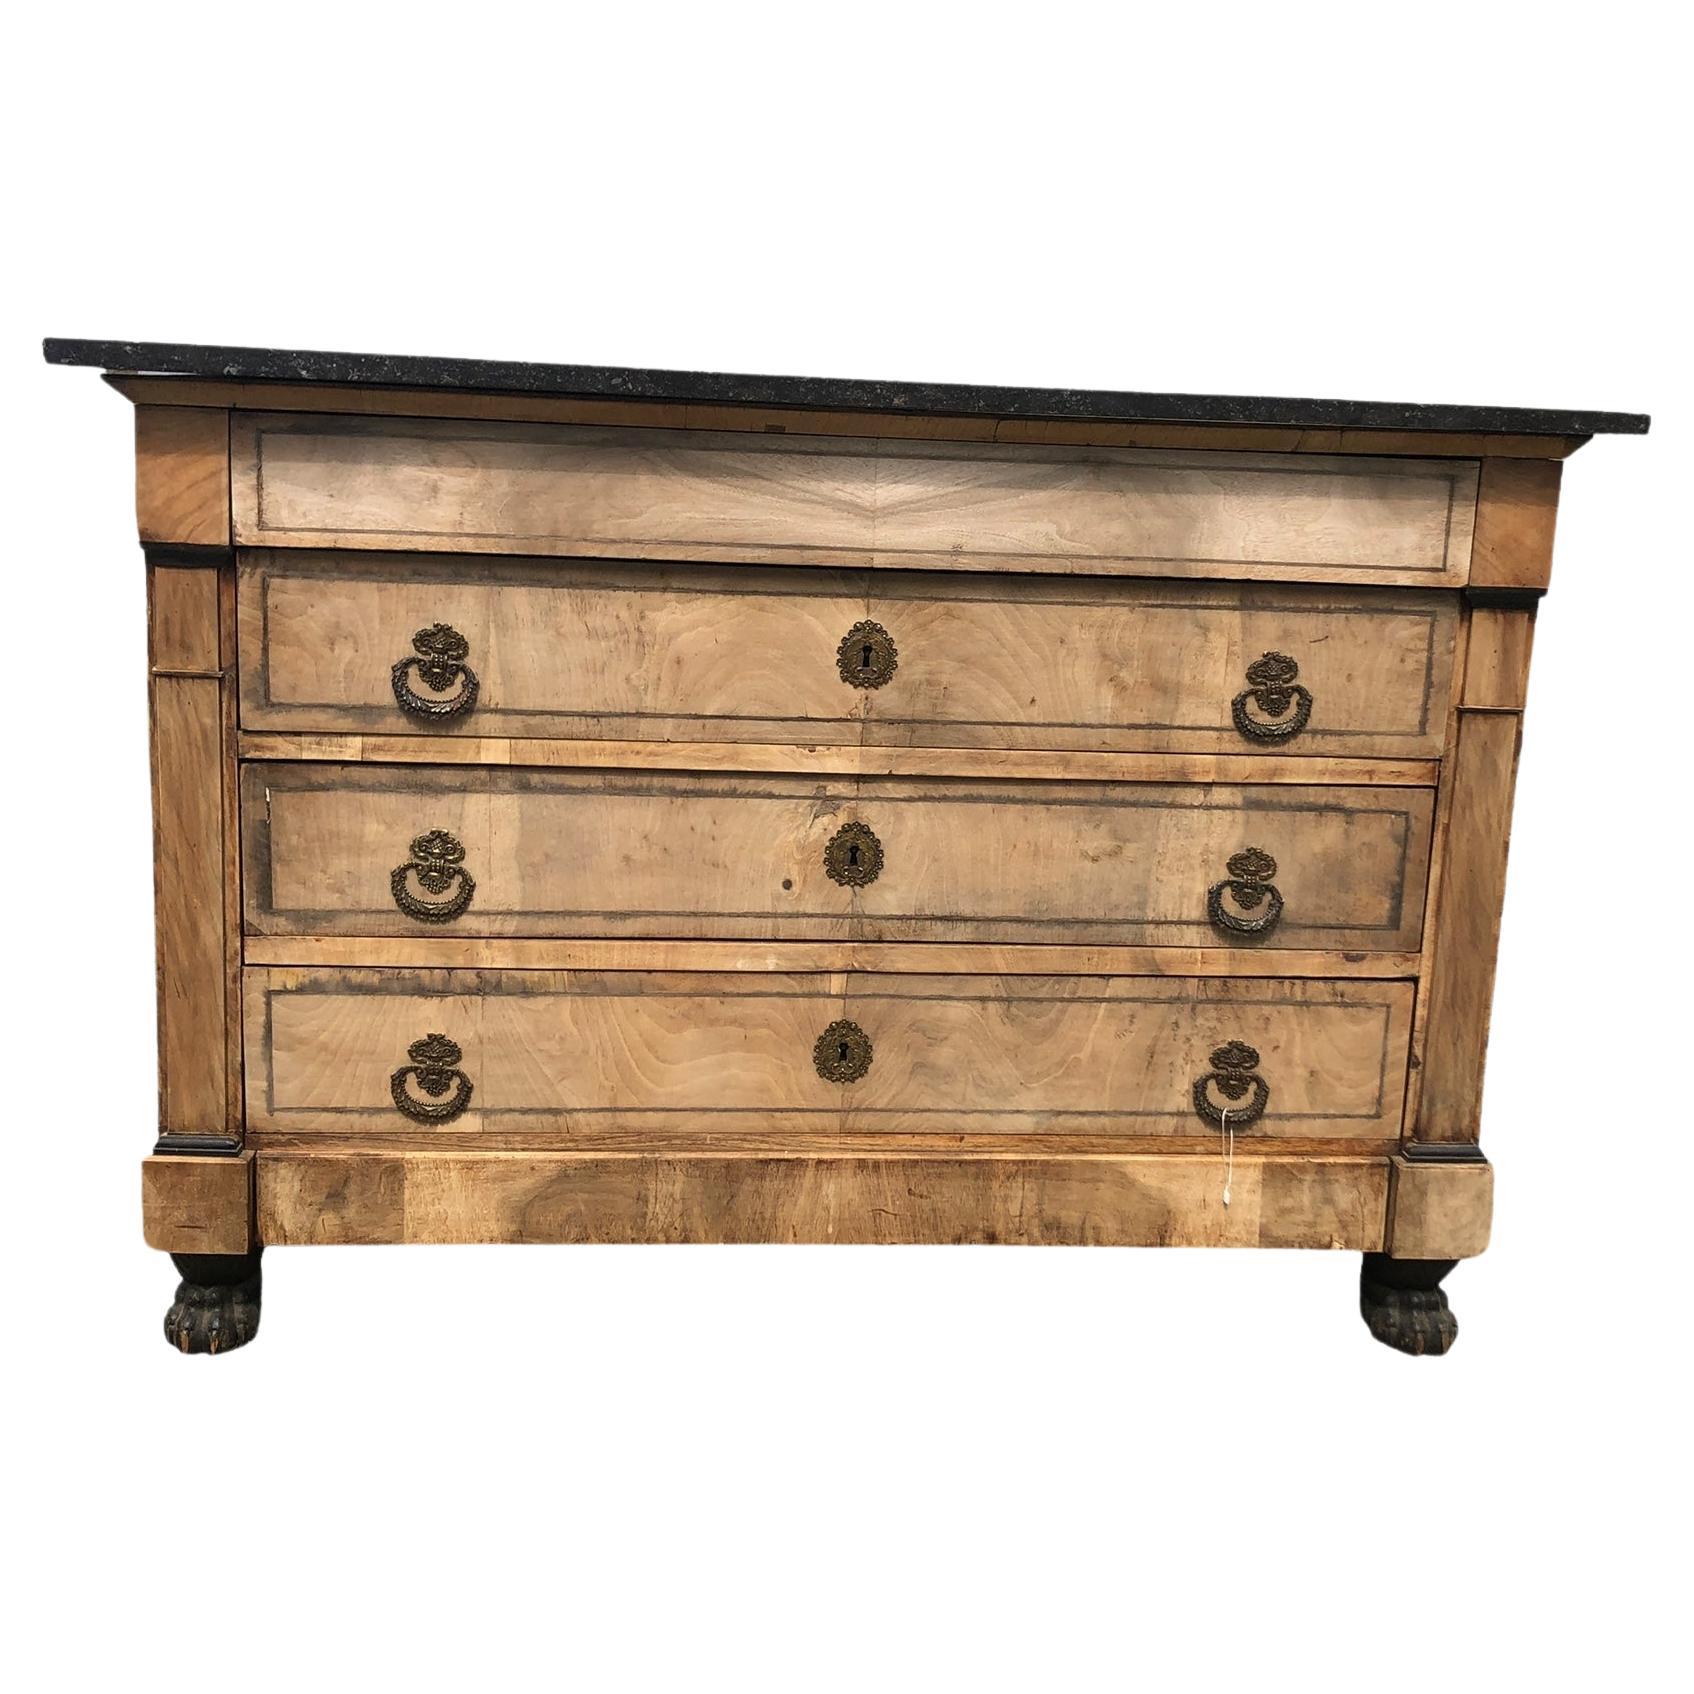 French Empire Style Bleached Walnut Marble Top Chest with Ebonized Feet. 